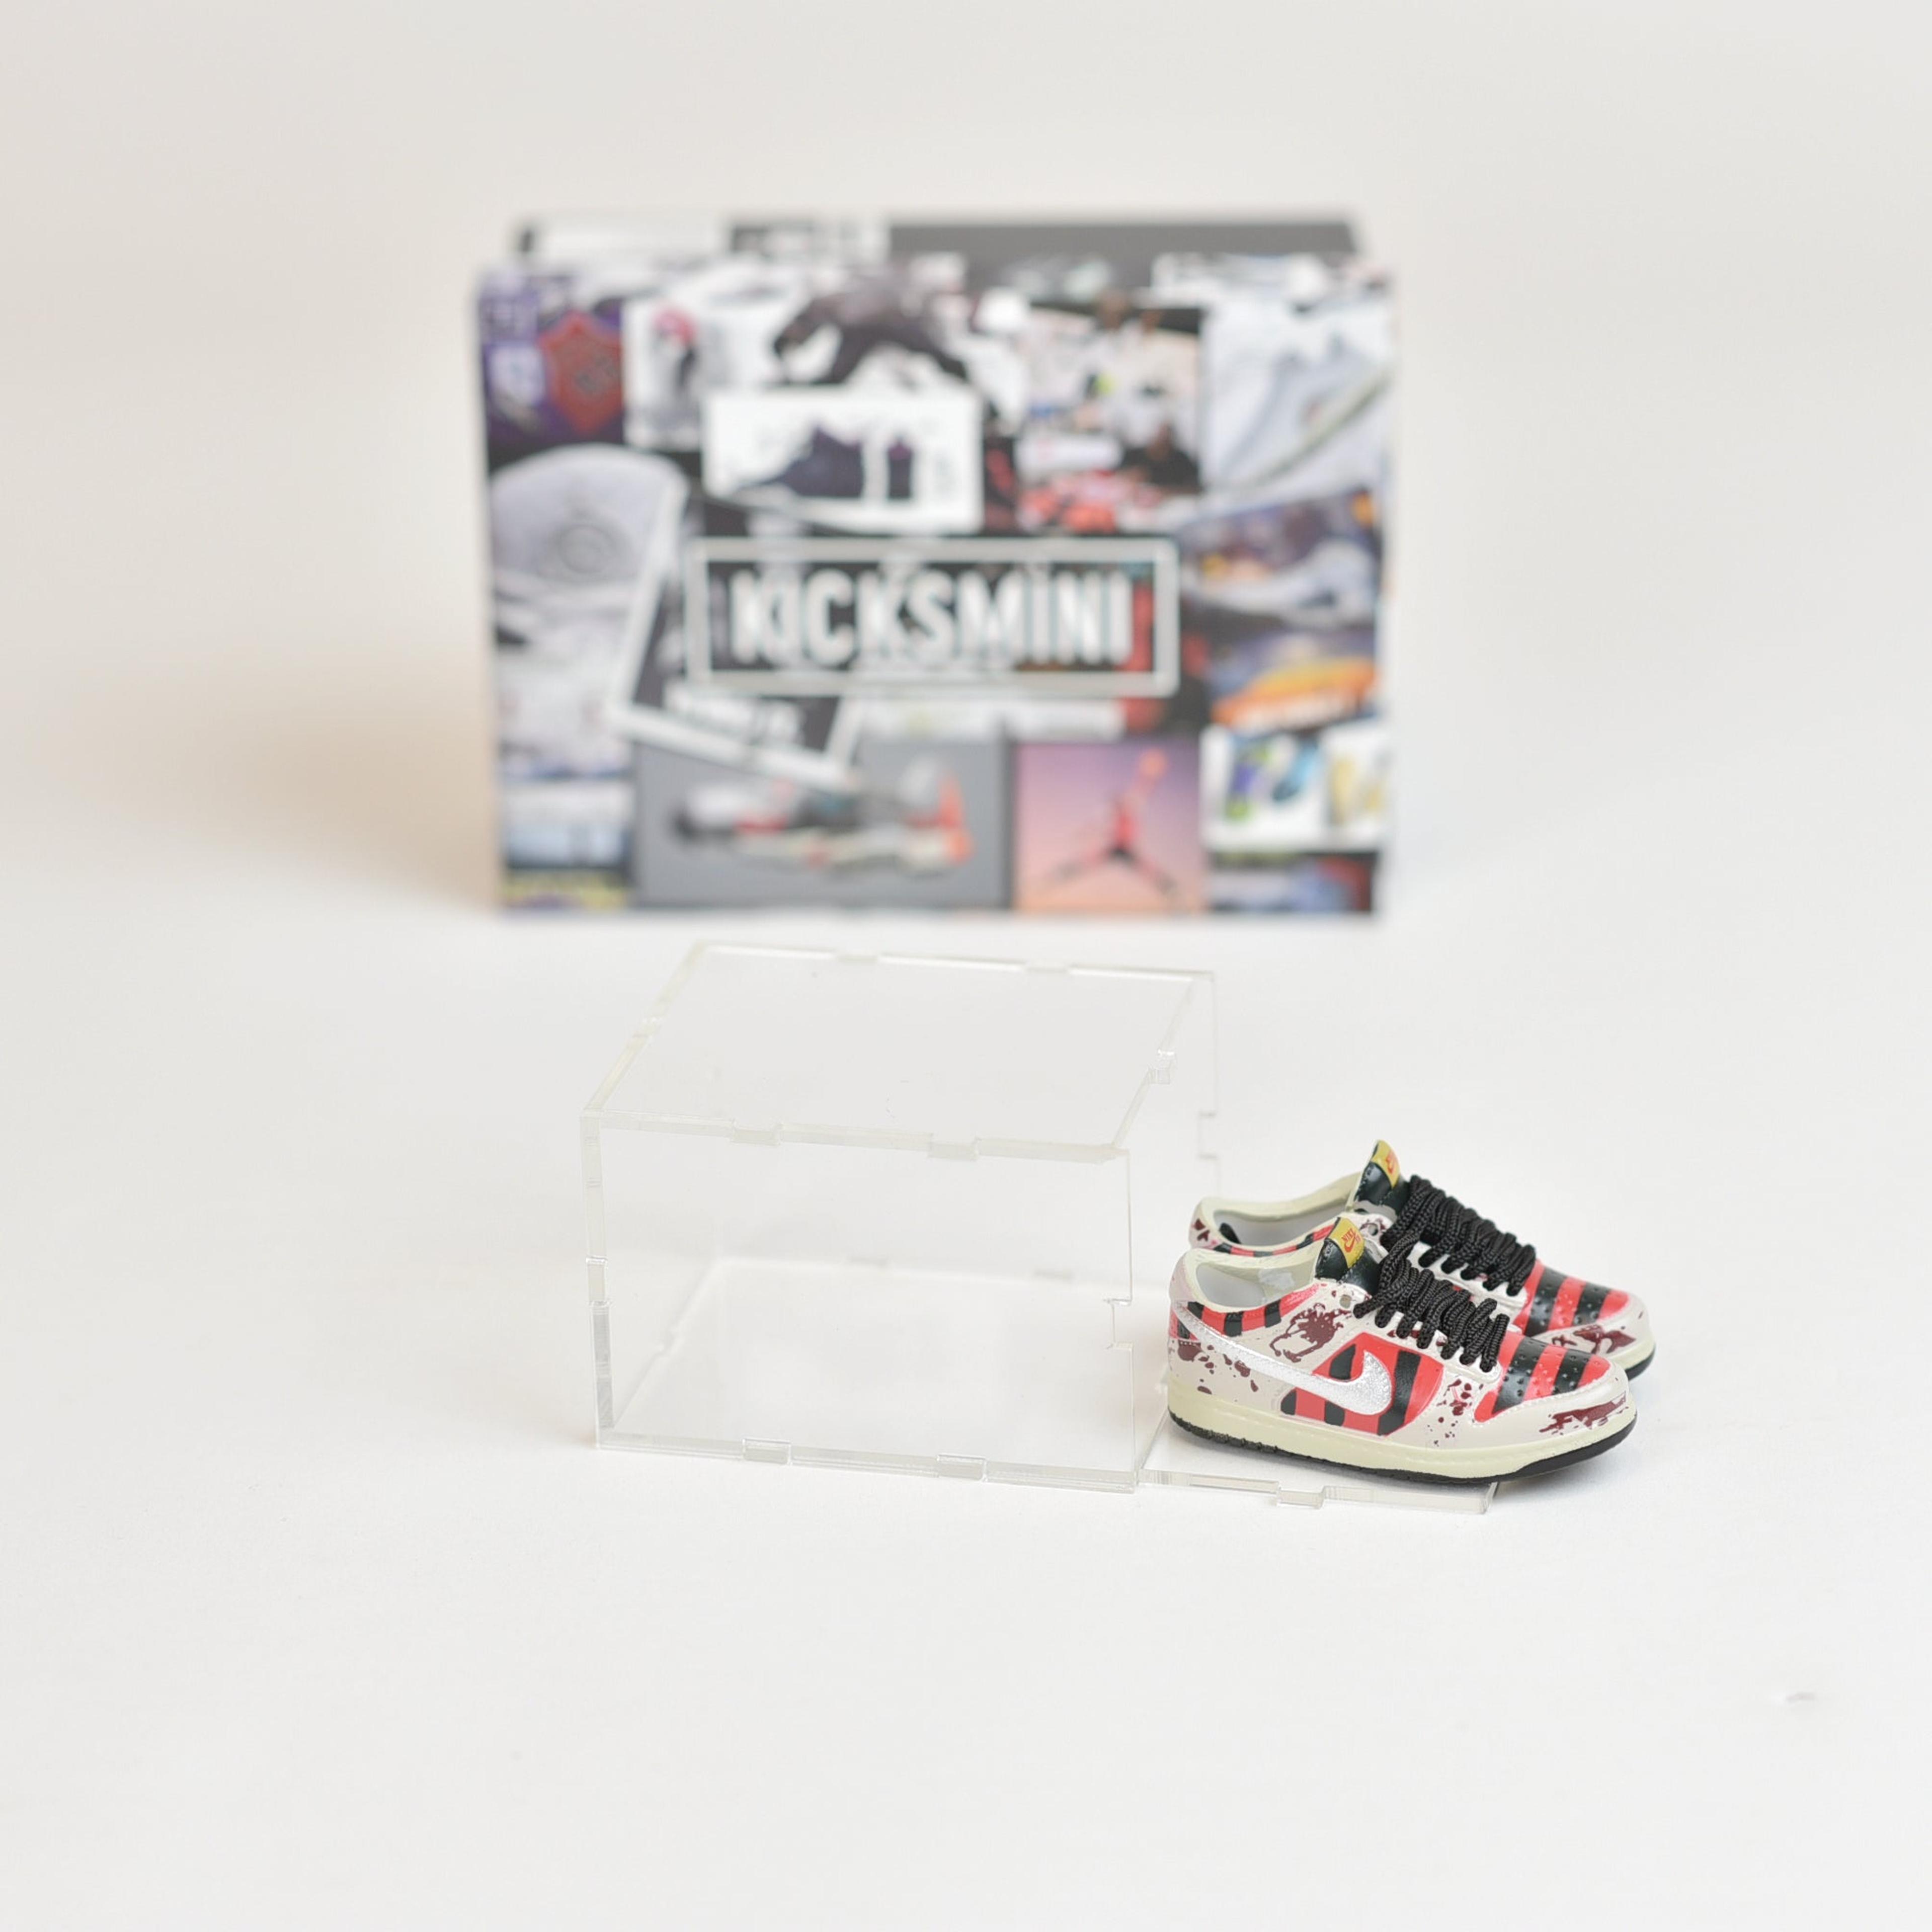 Alternate View 24 of SB Dunk Low Collaboration Mini Sneakers with Display Case